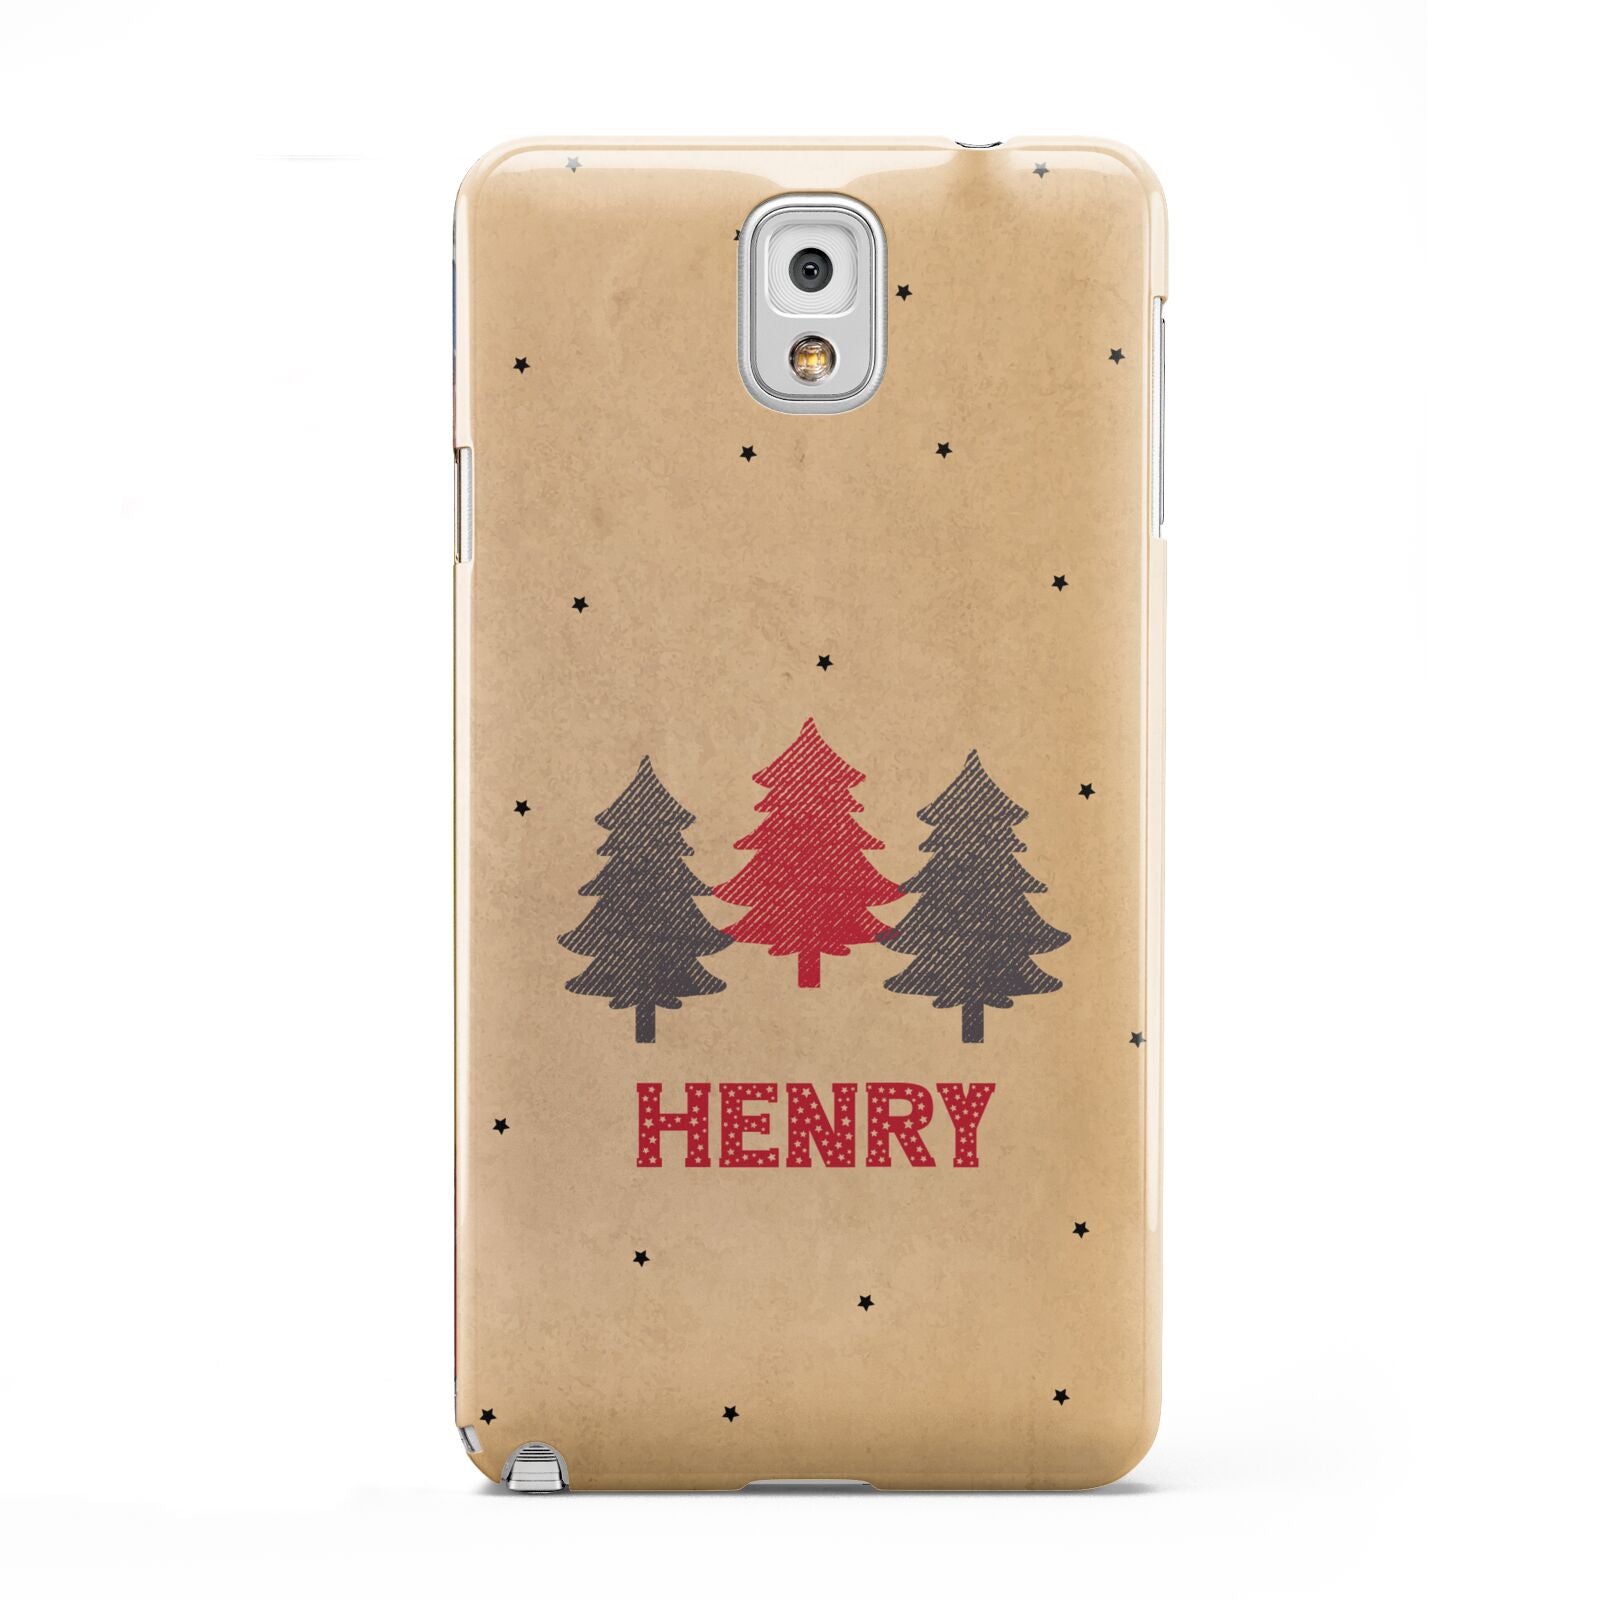 Personalised Christmas Tree Samsung Galaxy Note 3 Case